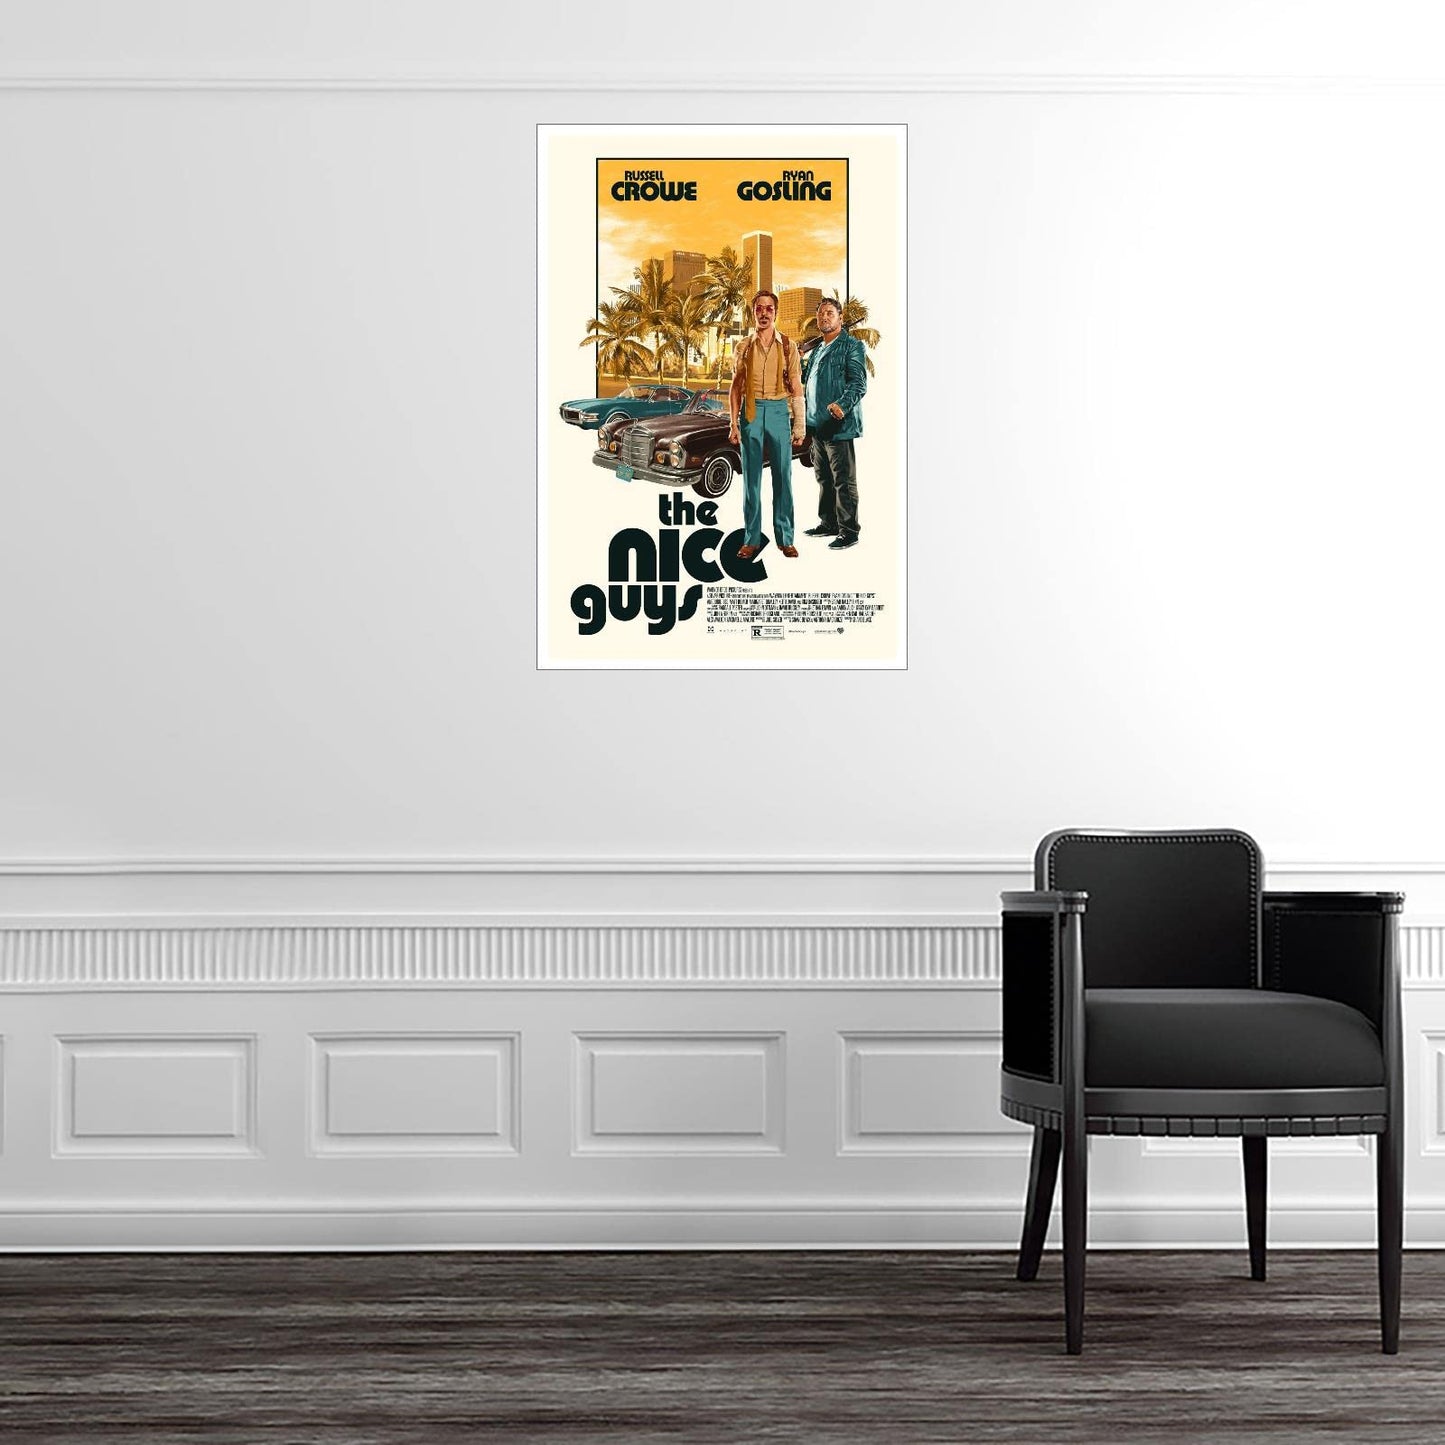 TOVAA The Nice Guys Comedy Action Movie Wall Art Canvas Prints Poster For Home Office Corridor Decorations Unframed 18"x12"